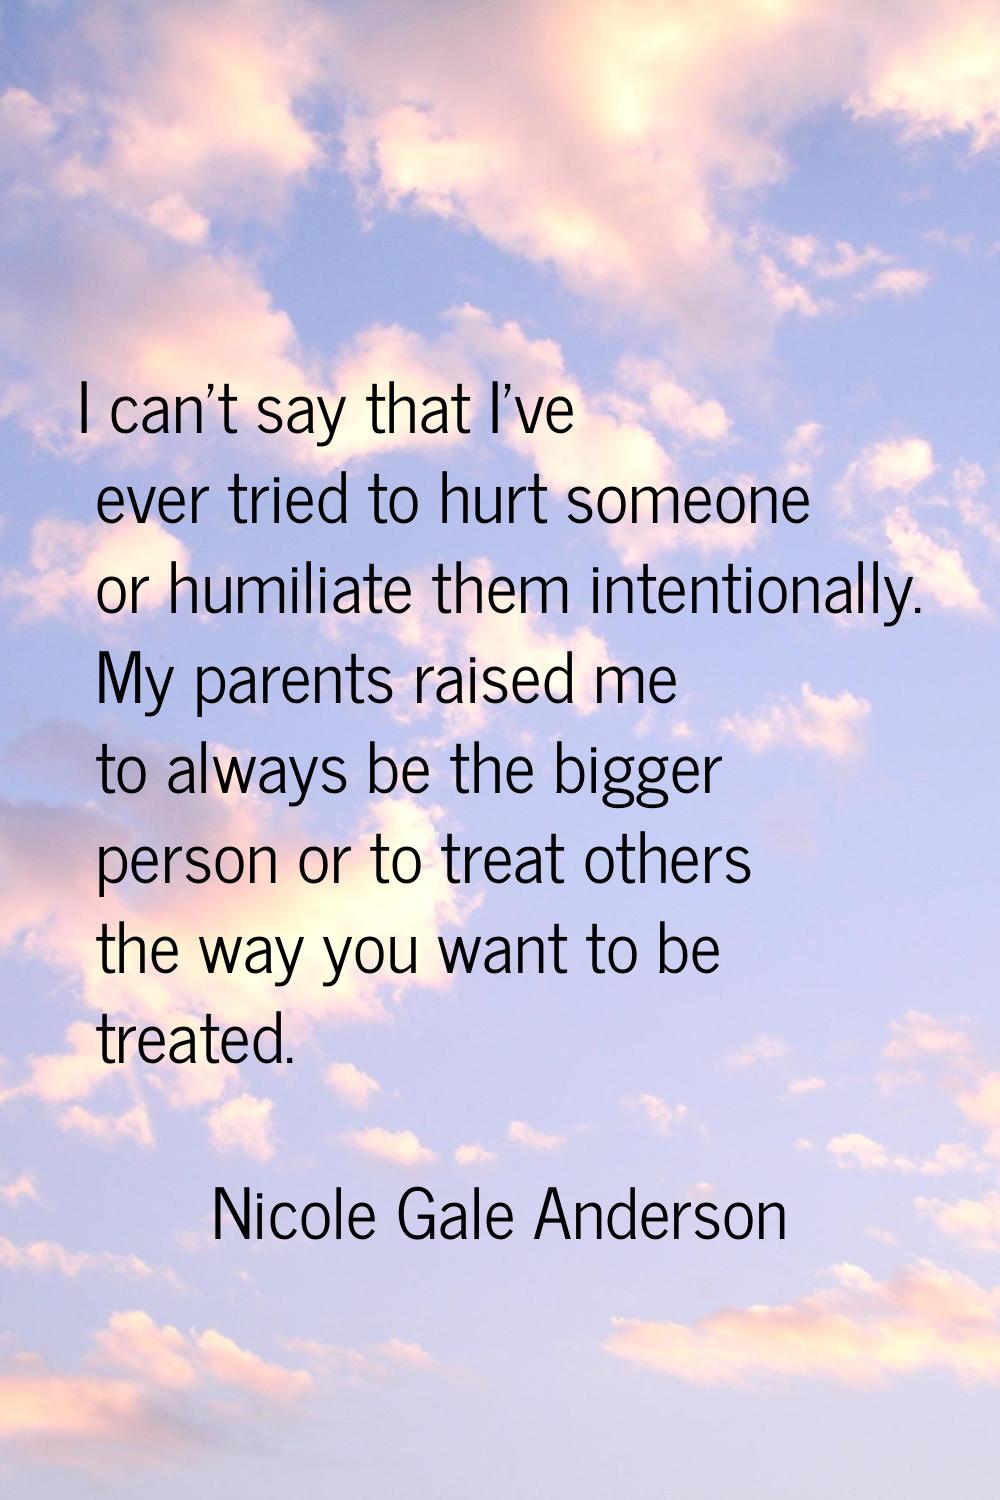 I can't say that I've ever tried to hurt someone or humiliate them intentionally. My parents raised